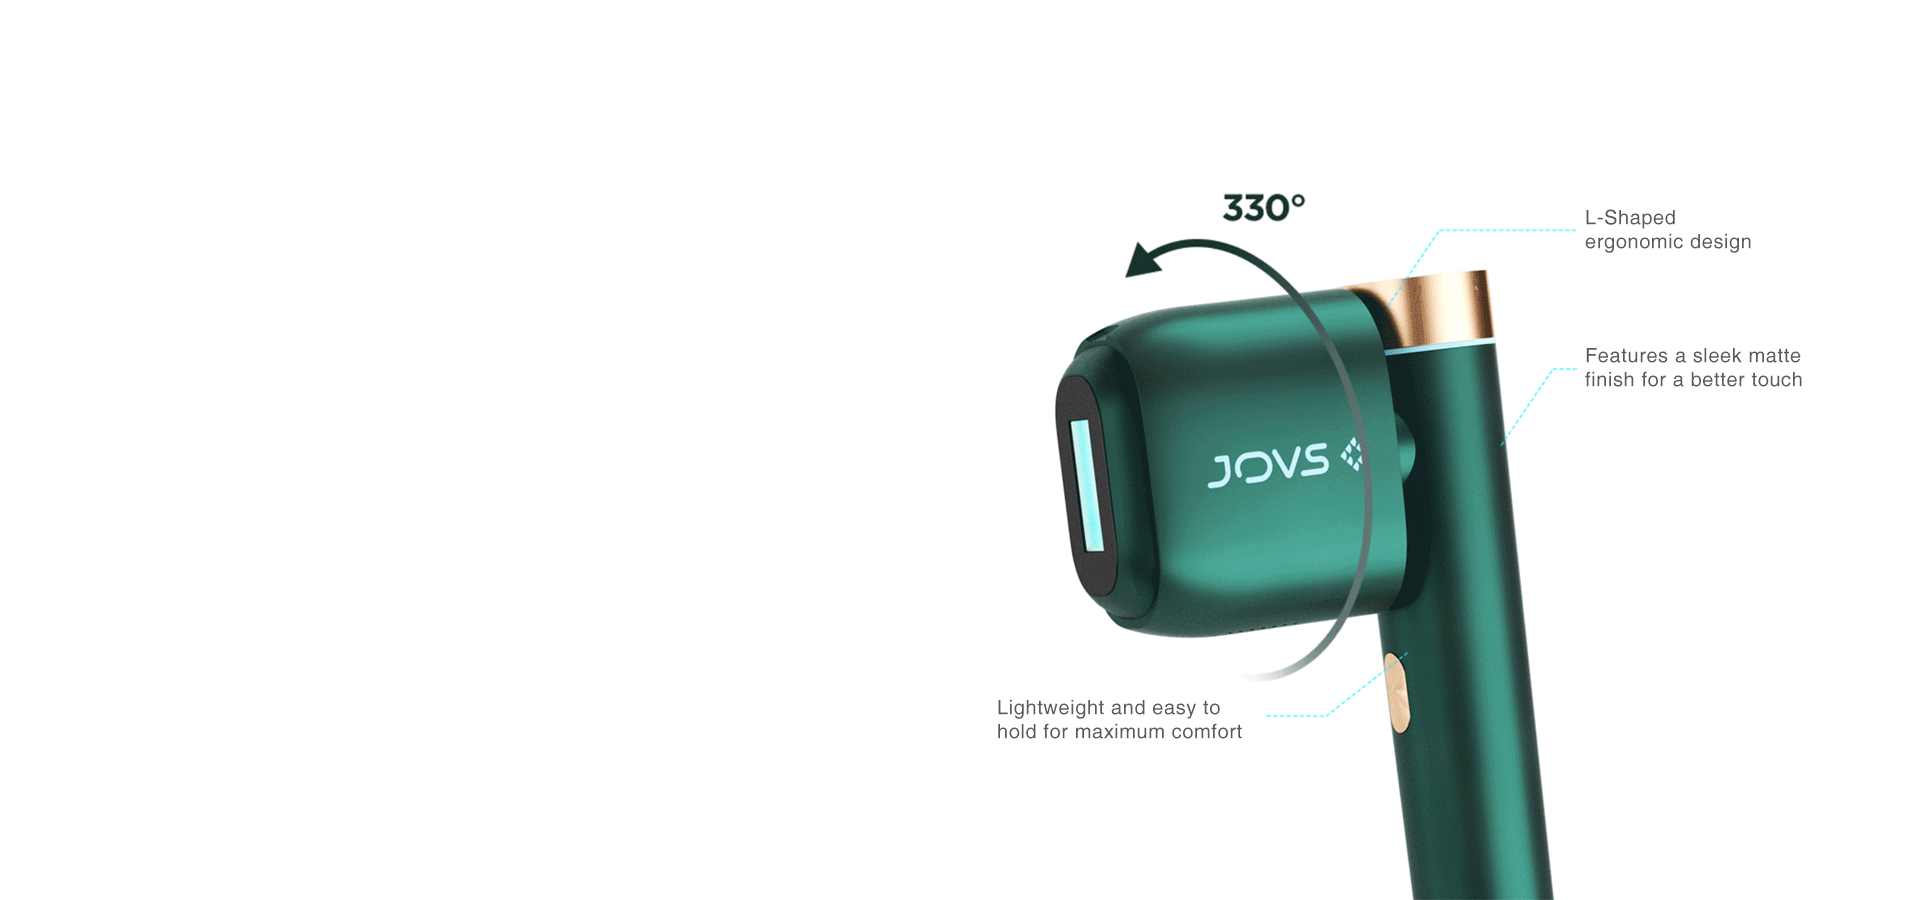 JOVS Venus Pro™ II IPL Hair Removal Device with 330-degree rotating head, L-shaped ergonomic design, and matte finish for comfortable and efficient hair removal.